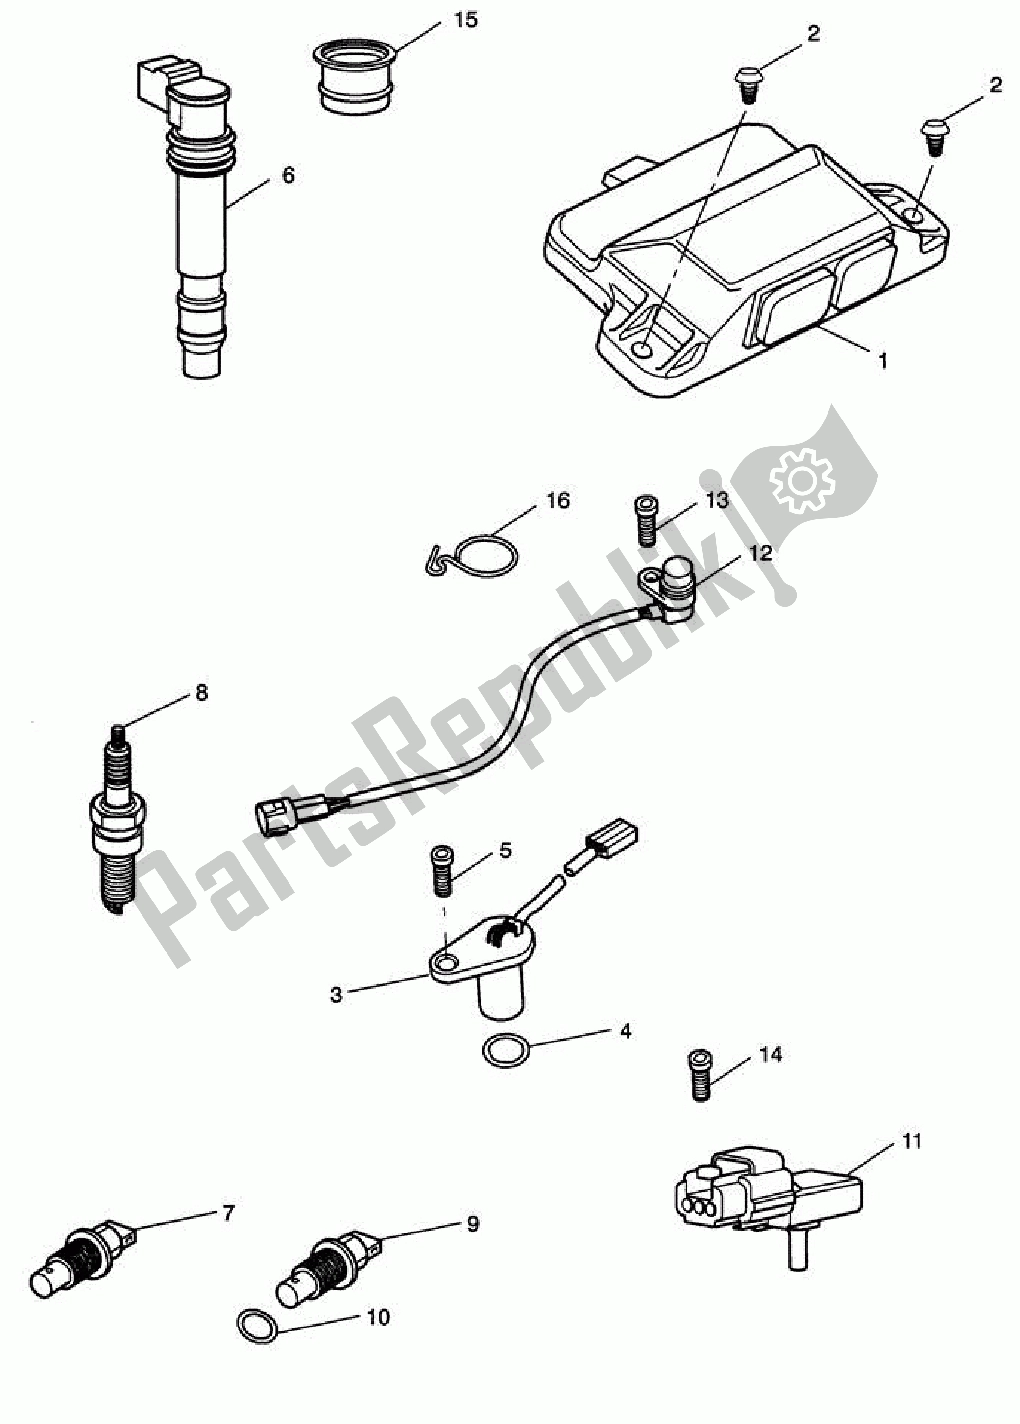 All parts for the Engine Management System of the Triumph Speed Triple 1050 2008 - 2012